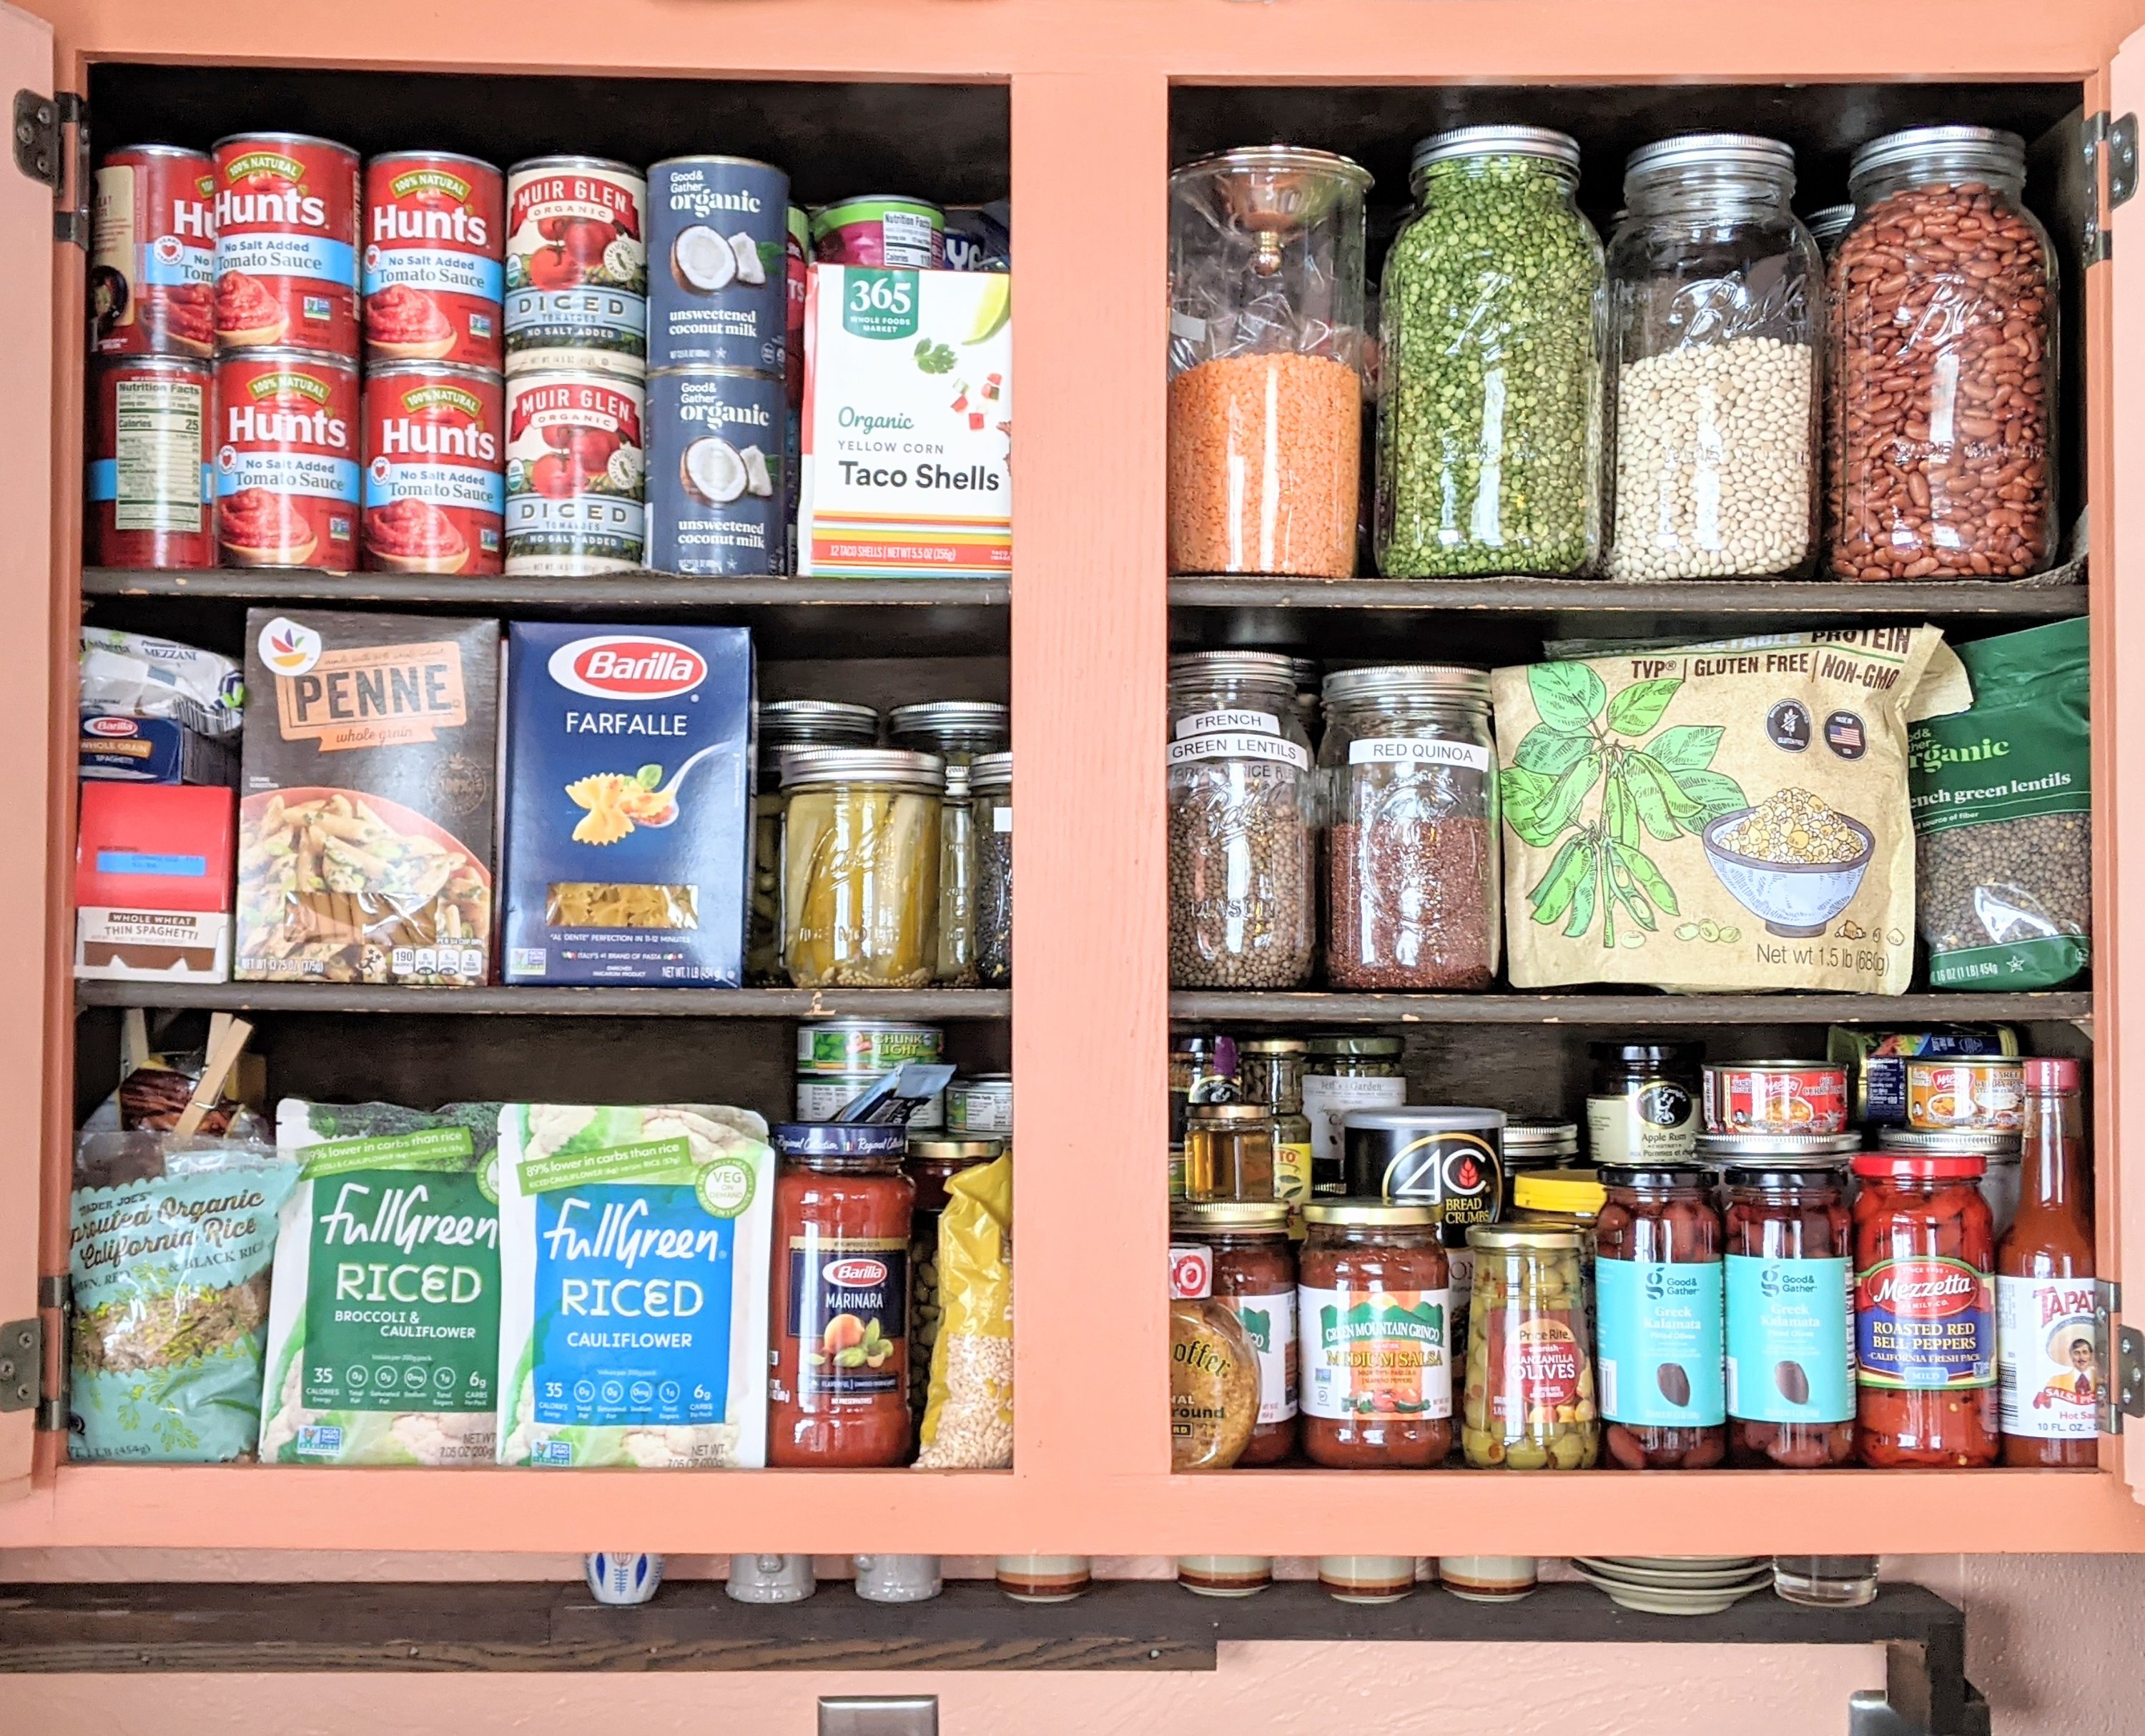 125 Vegan Pantry Staples List To Stock Up On, with Recipes!